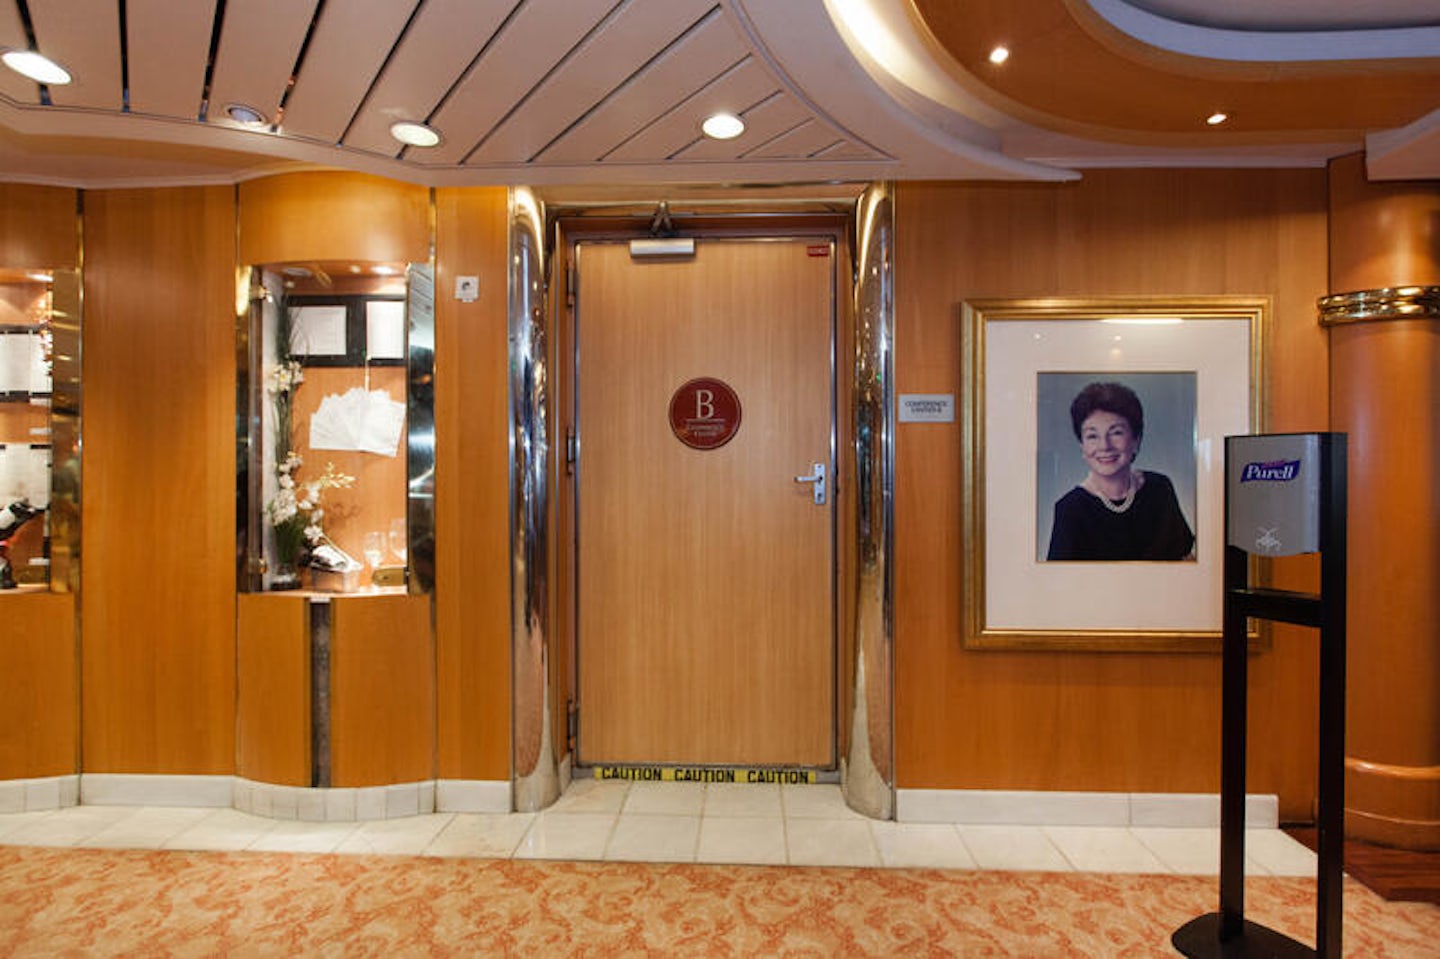 Conference Rooms on Grandeur of the Seas